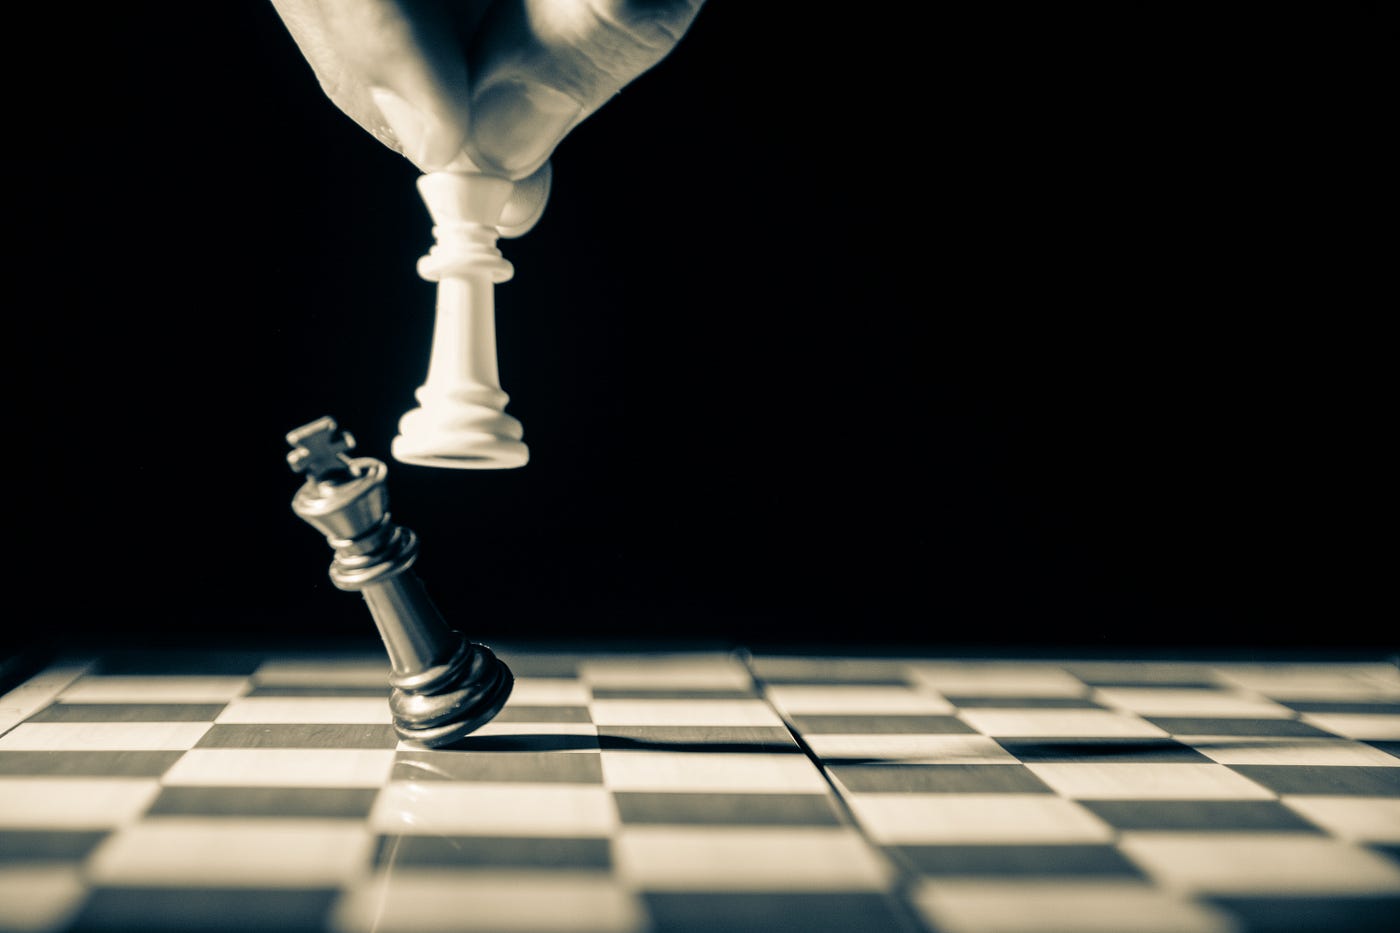 Translating Chess Tactics Into Entrepreneurial Triumphs